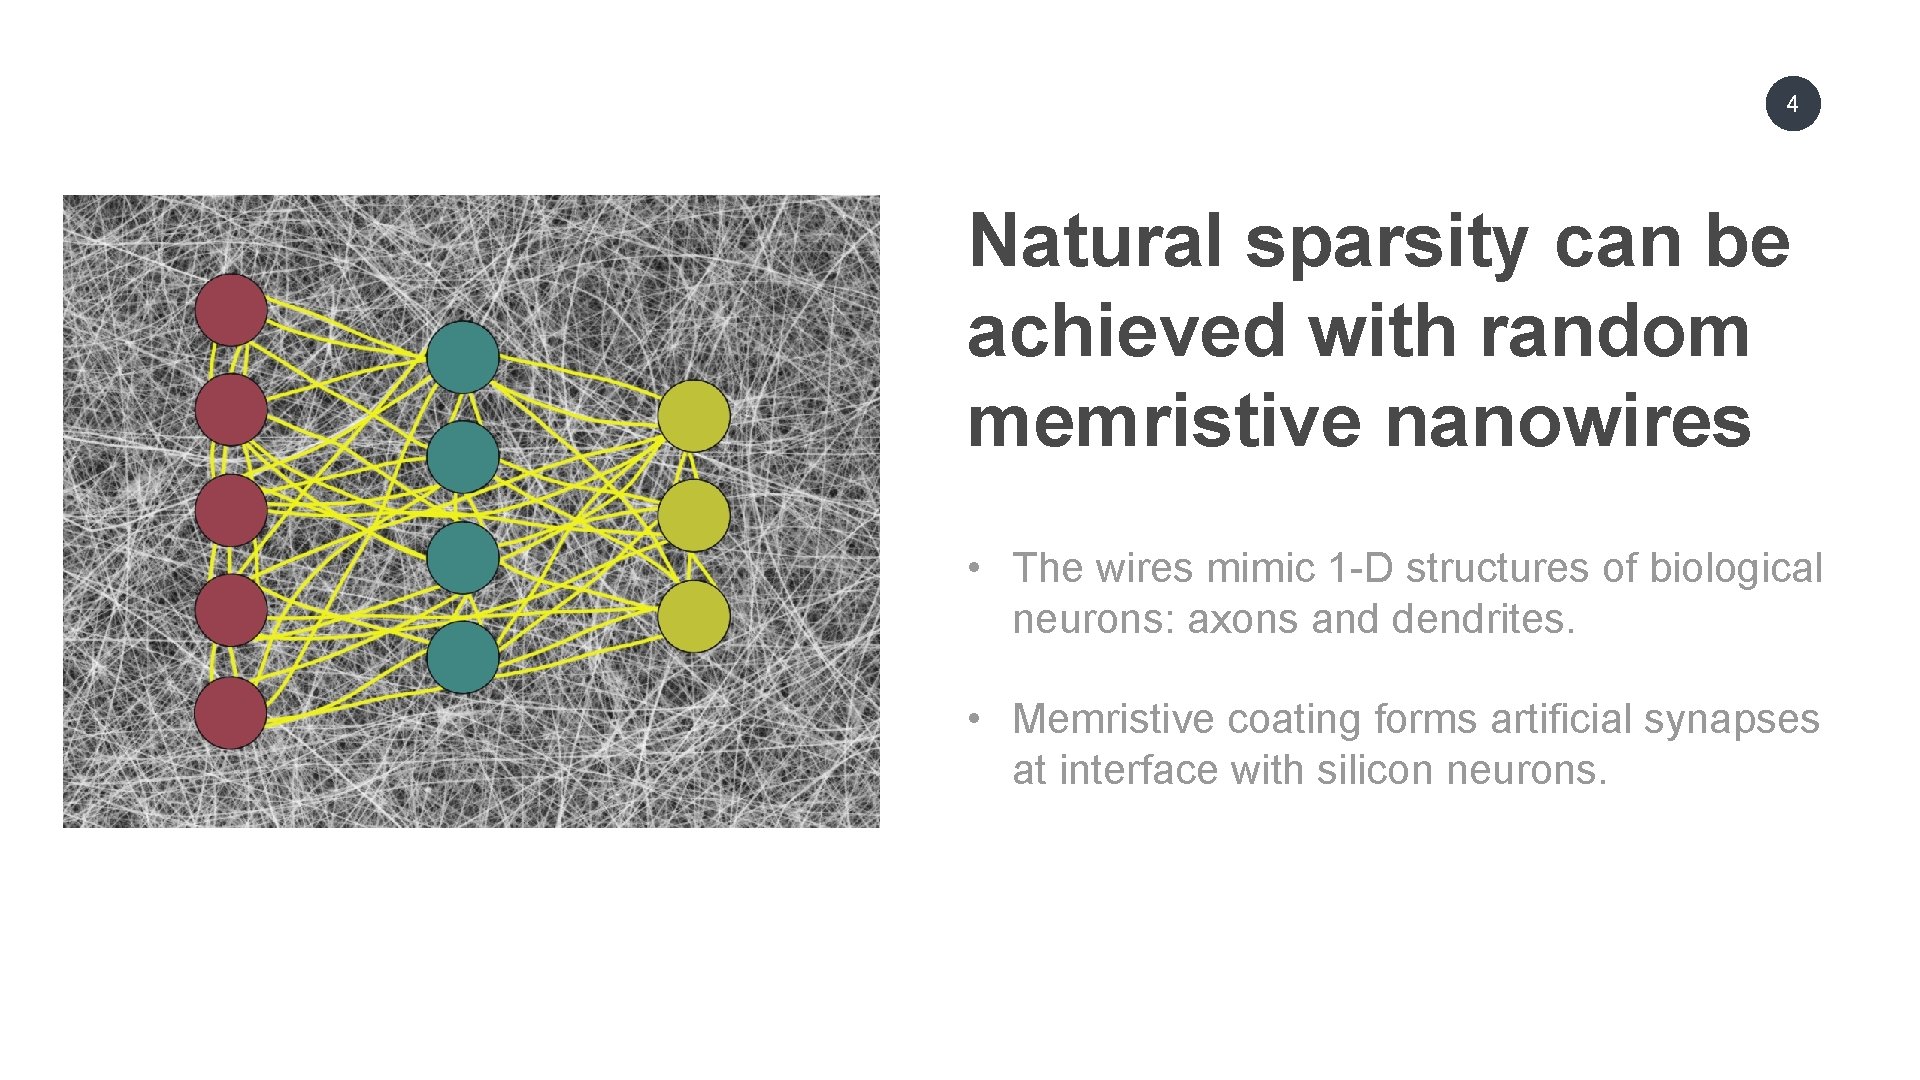 4 OUR AGENDA Natural sparsity can be achieved with random memristive nanowires • The